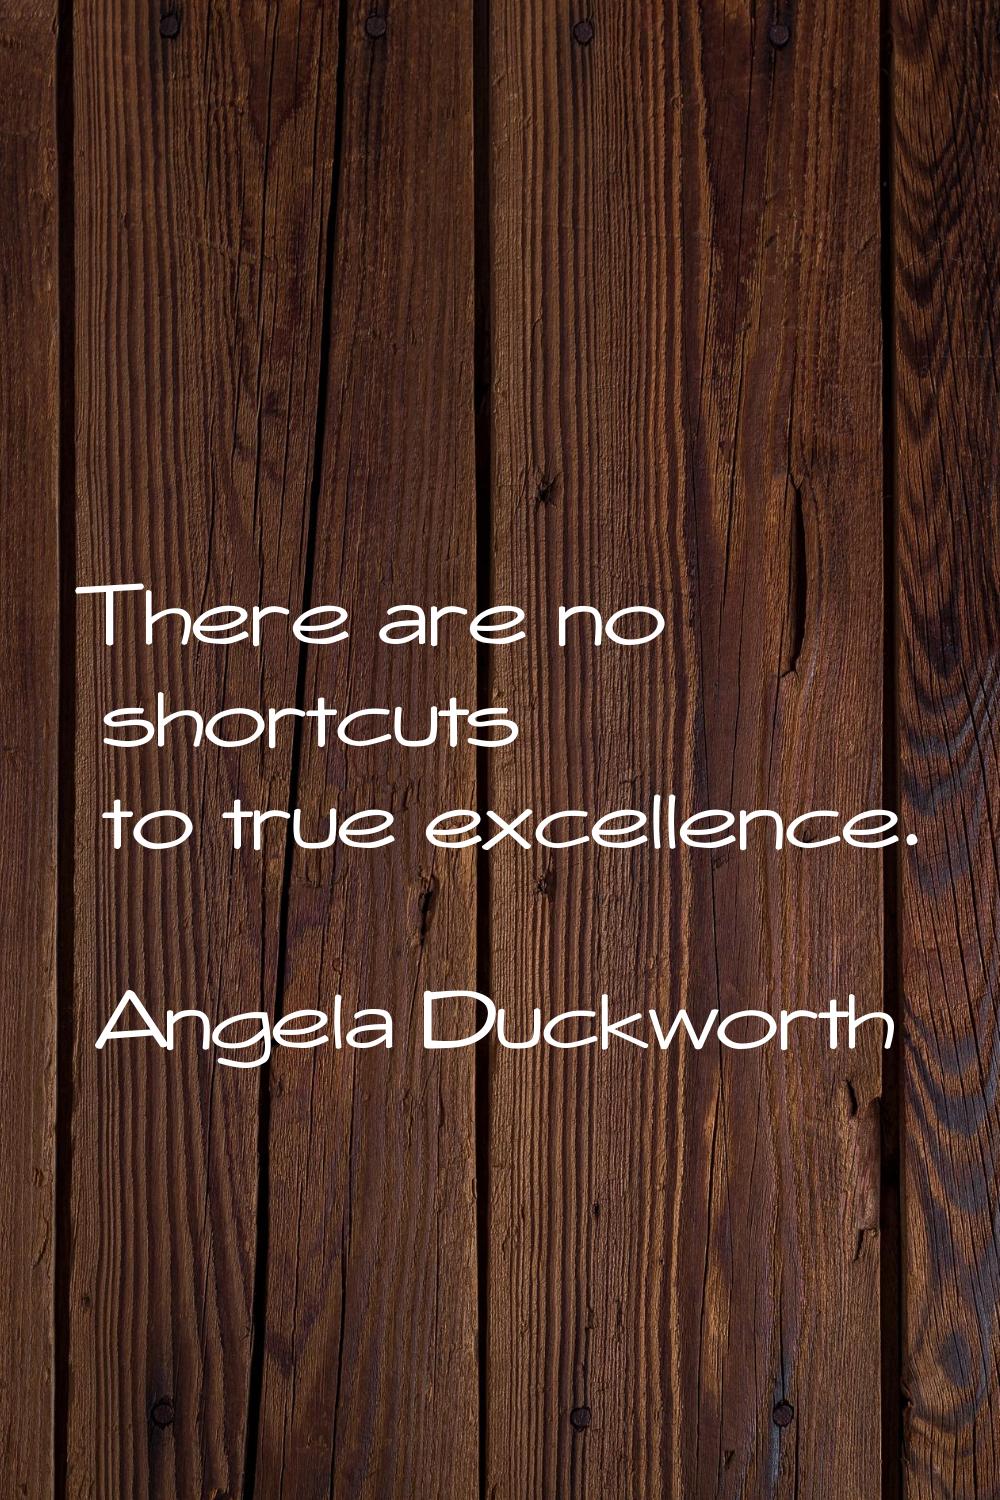 There are no shortcuts to true excellence.